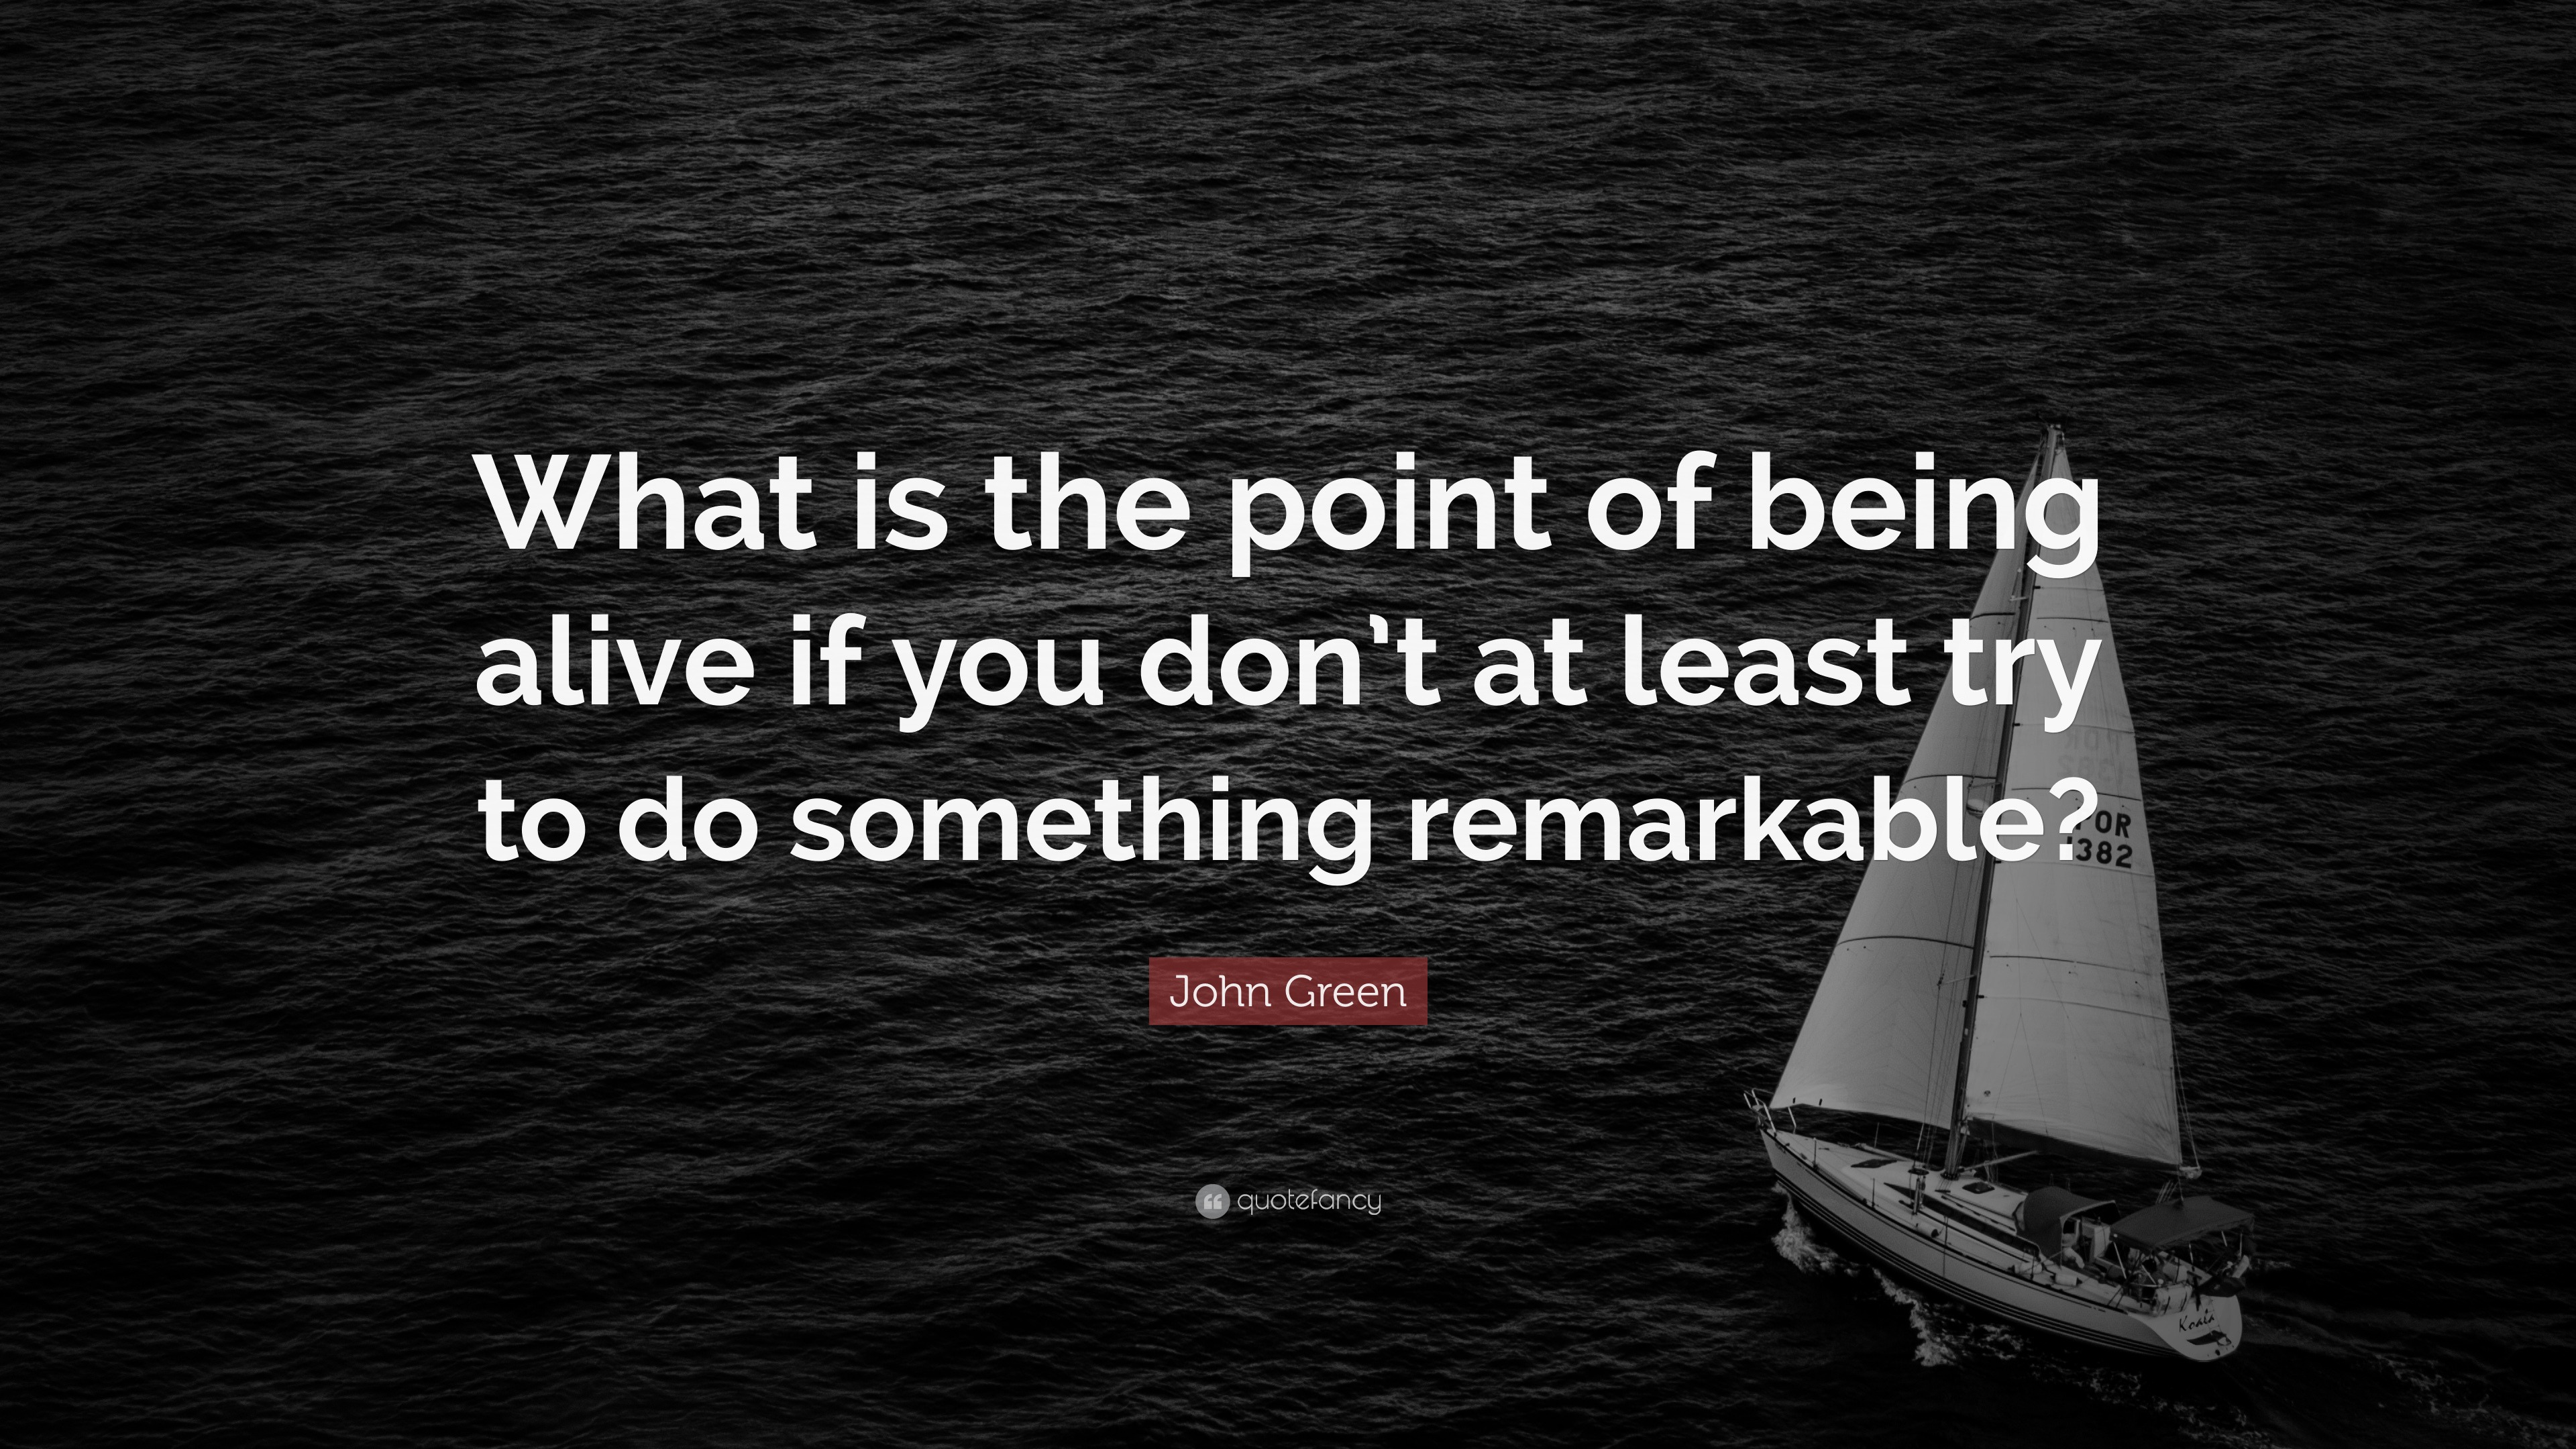 Life Quotes “What is the point of being alive if you don t